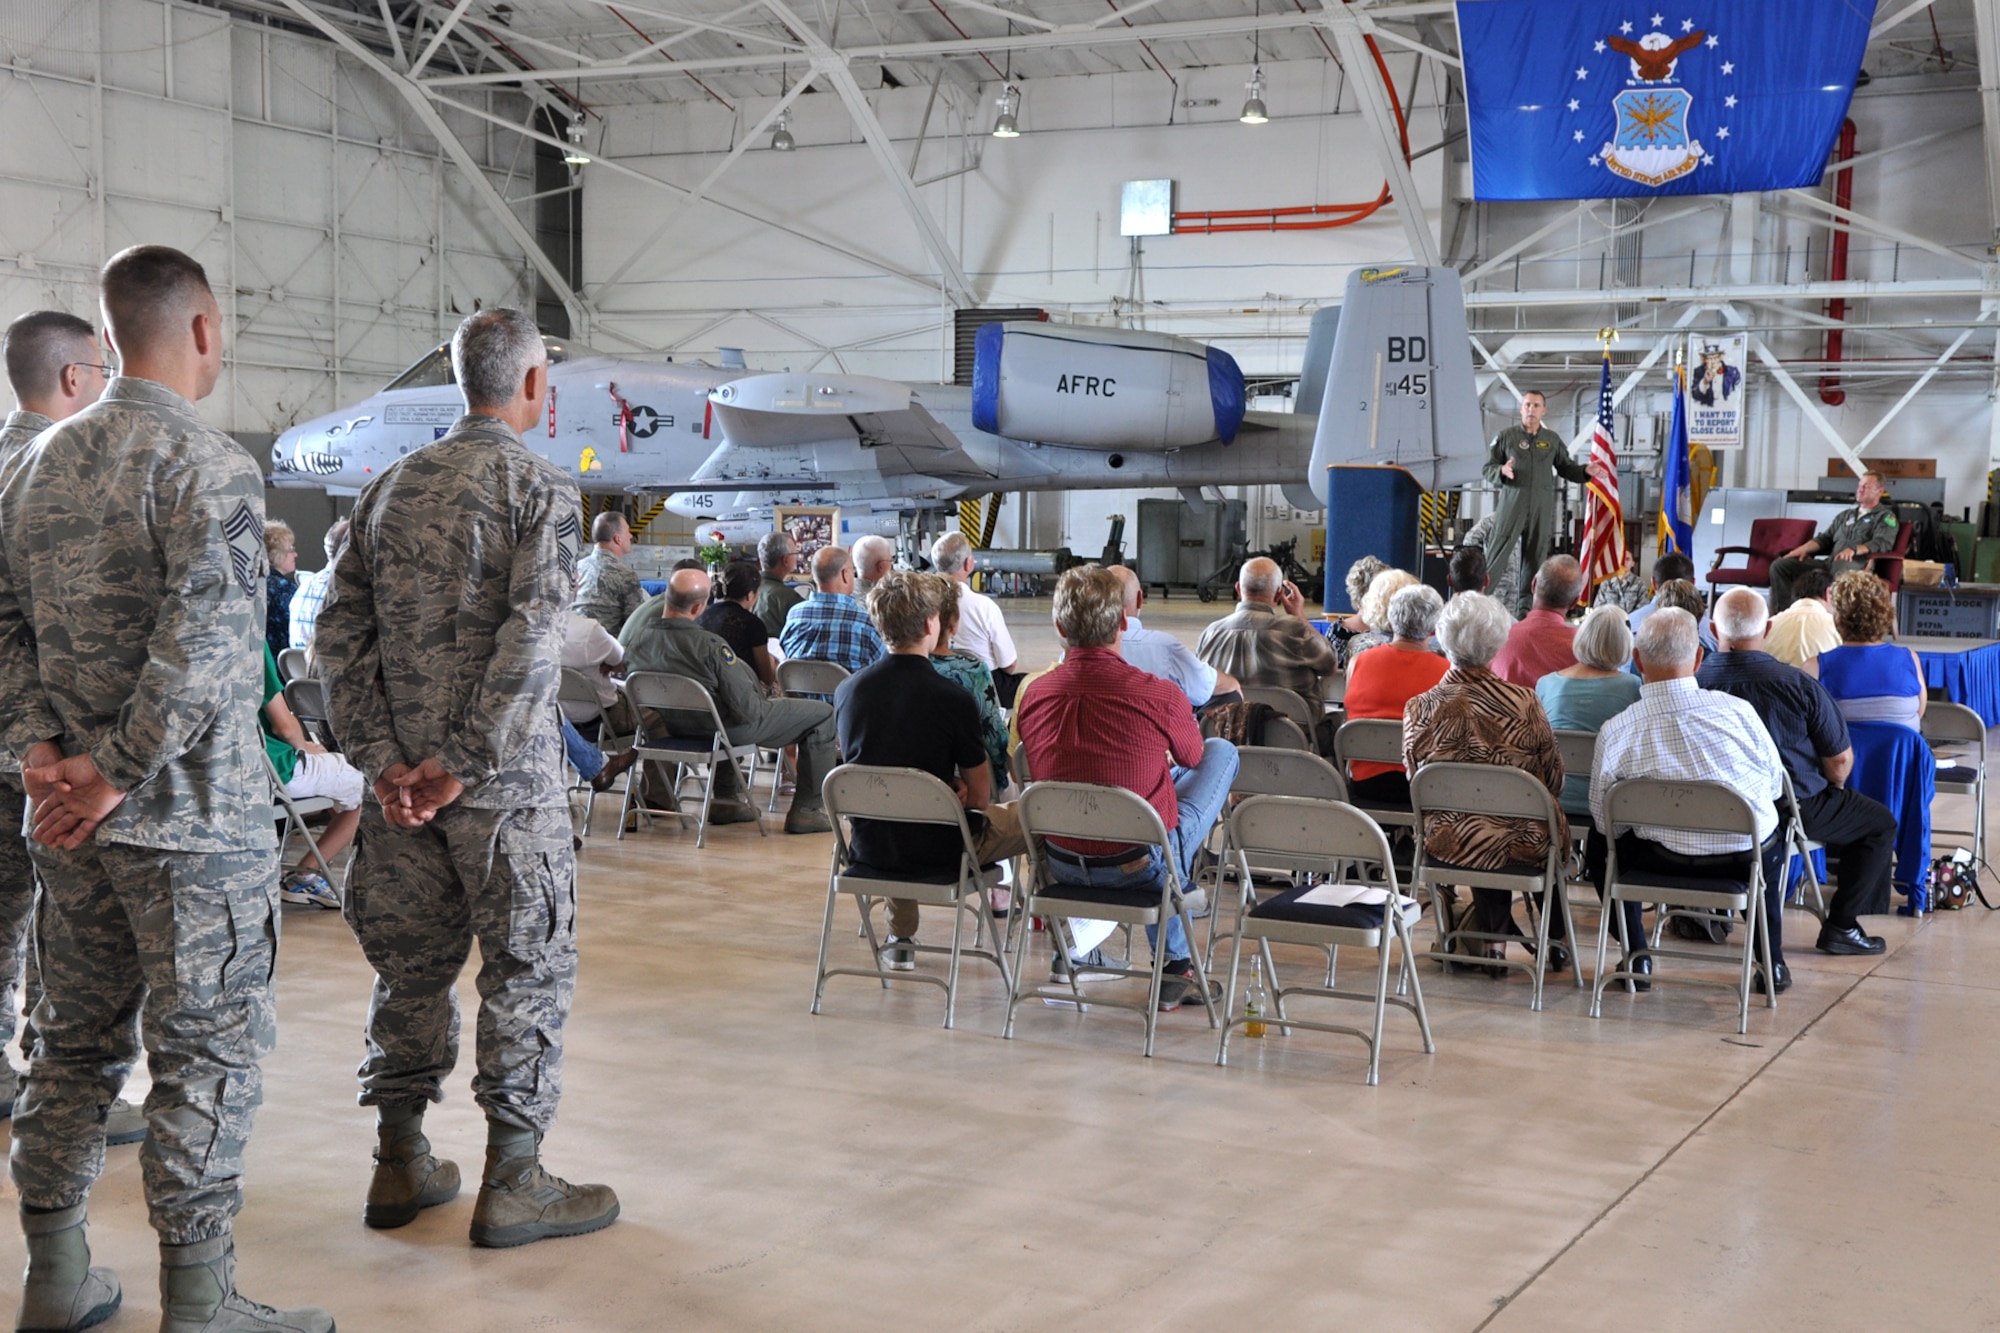 U.S. Air Force Col. John Breazeale, commander, 917th Fighter Group, speaks to family and friends of Lt. Col. Rodney Glass, the 917th FG deputy commander, during a retirement ceremony at Barksdale Air Force Base, La., Nov. 3, 2012. Glass, who has more than 4,000 flying hours, was retiring after 28 years of service to his country. (U.S. Air Force photo by Master Sgt. Jeff Walston/Released)